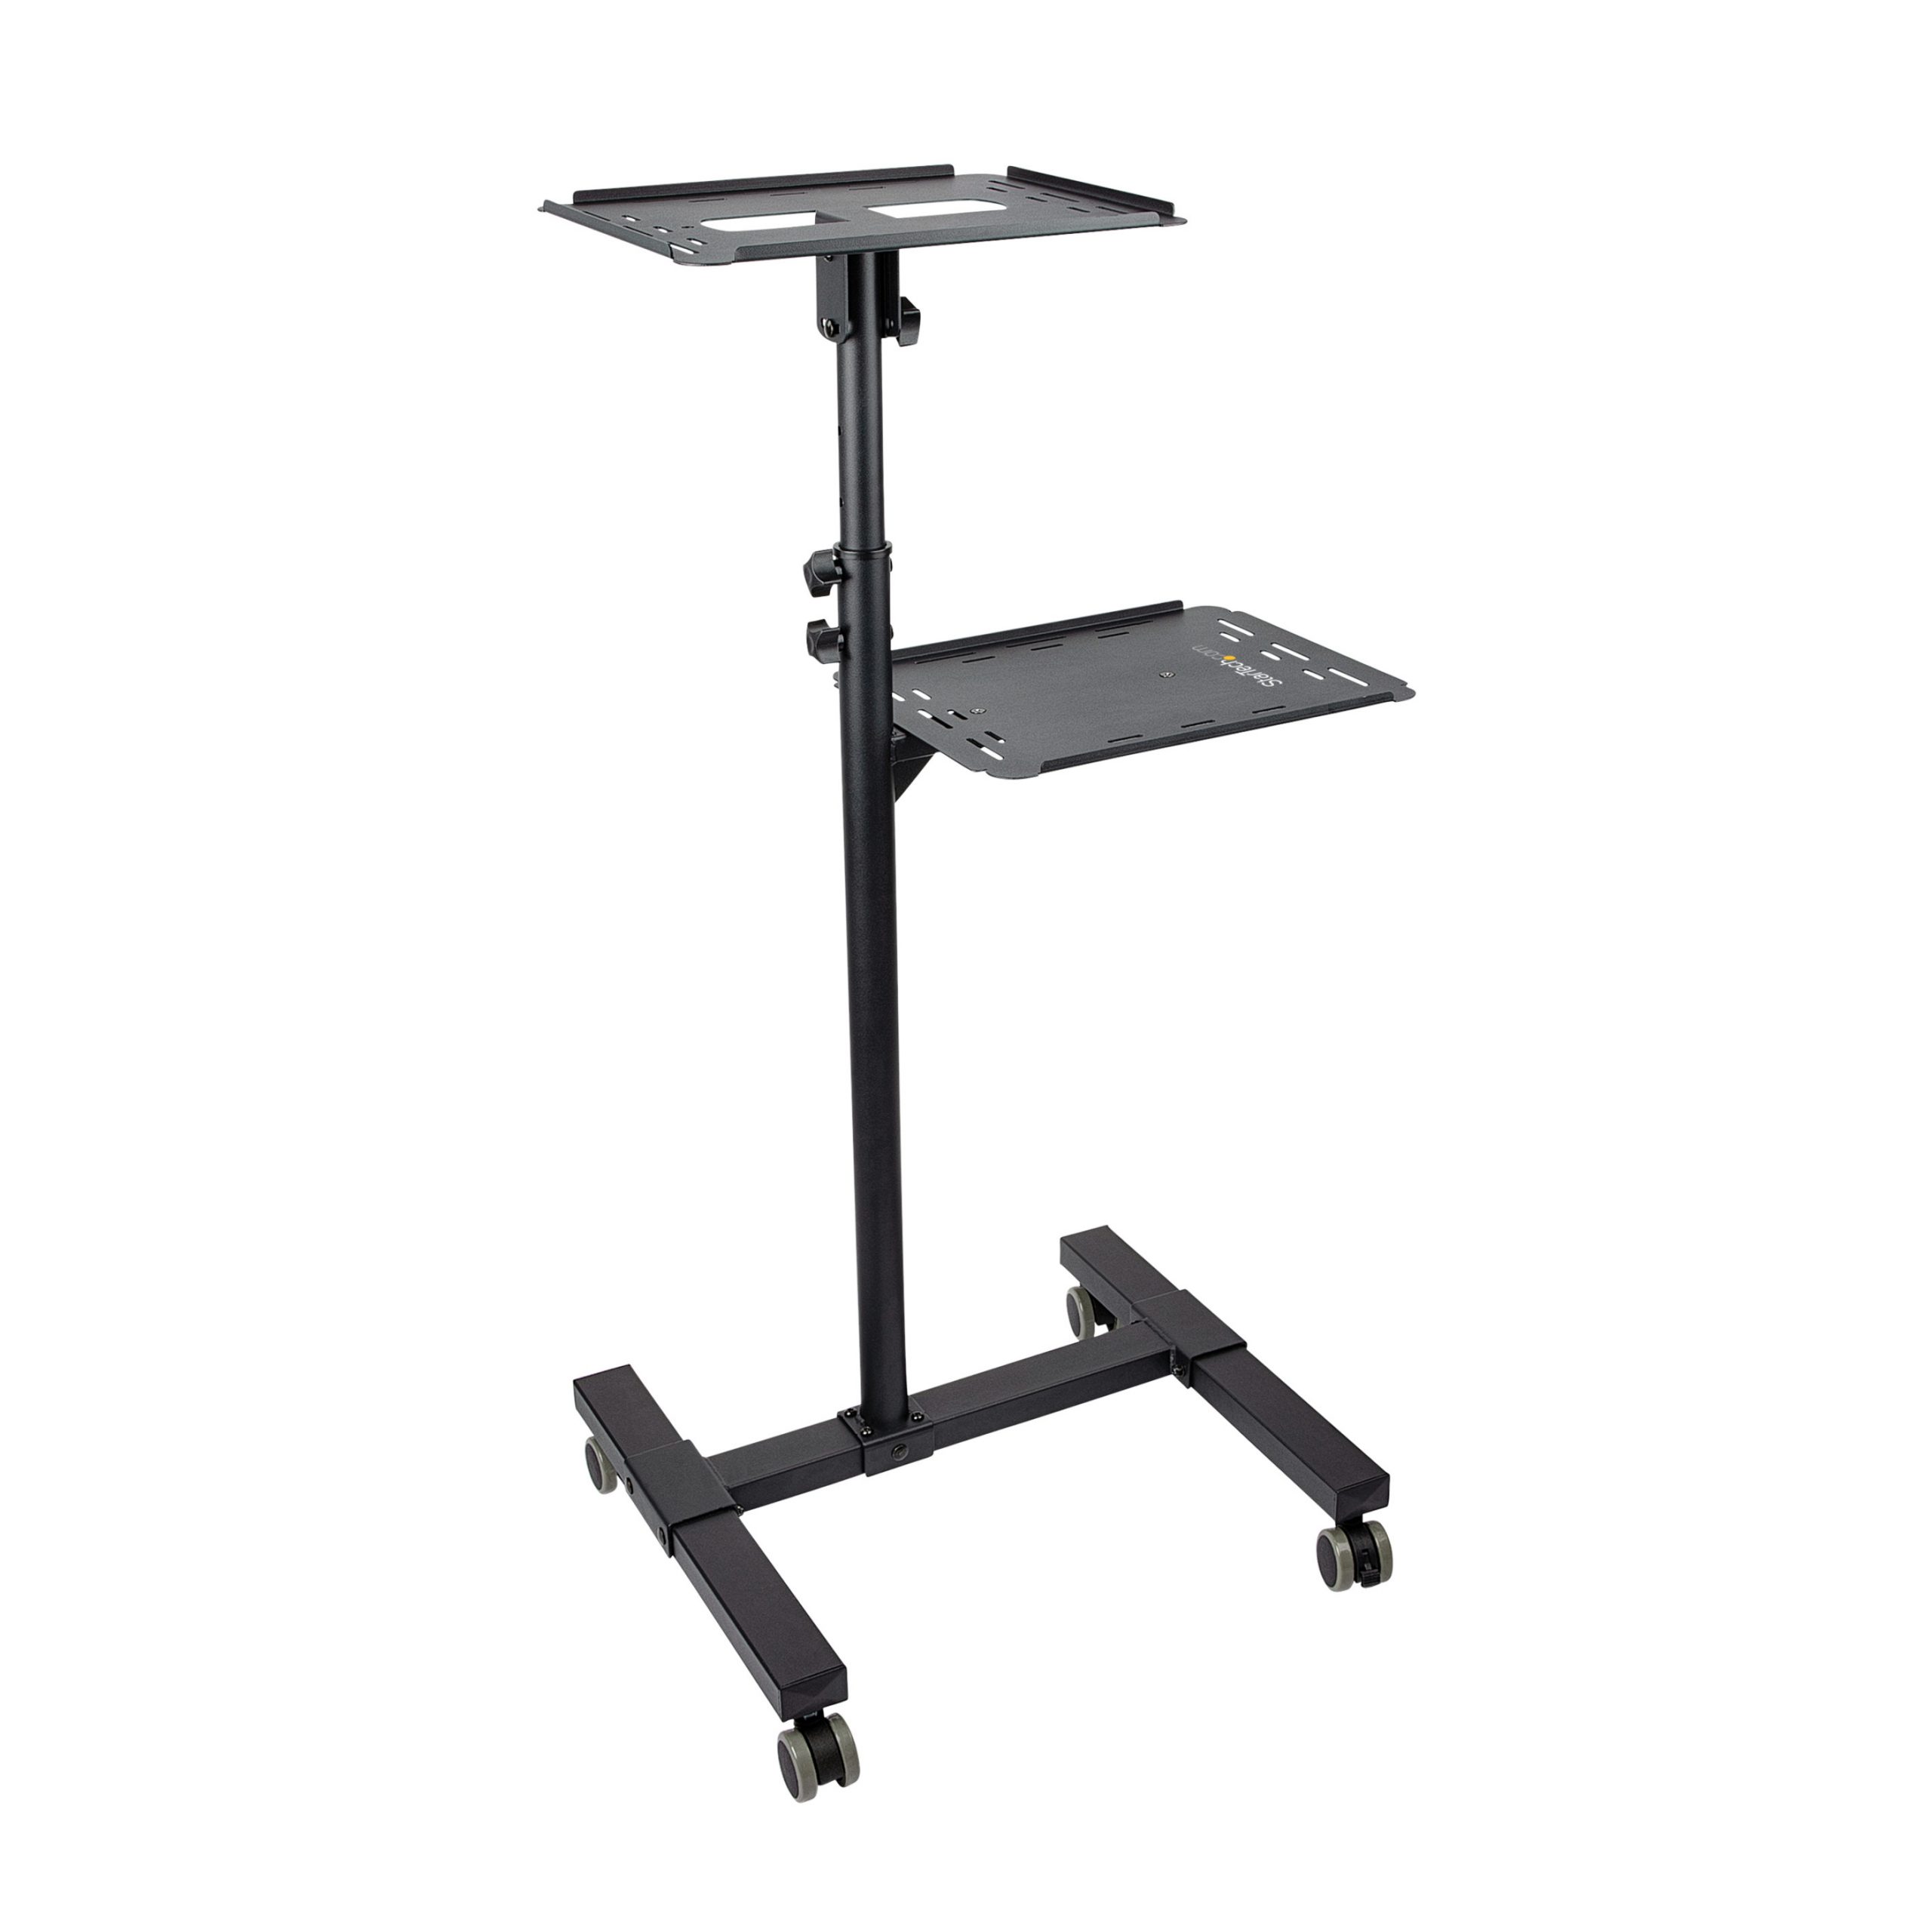 Startech .com Mobile Projector and Laptop Stand/Cart, Heavy Duty Portable Projector Stand/Presentation Cart (22lb/shelf), Height Adjustable -… ADJPROJCART